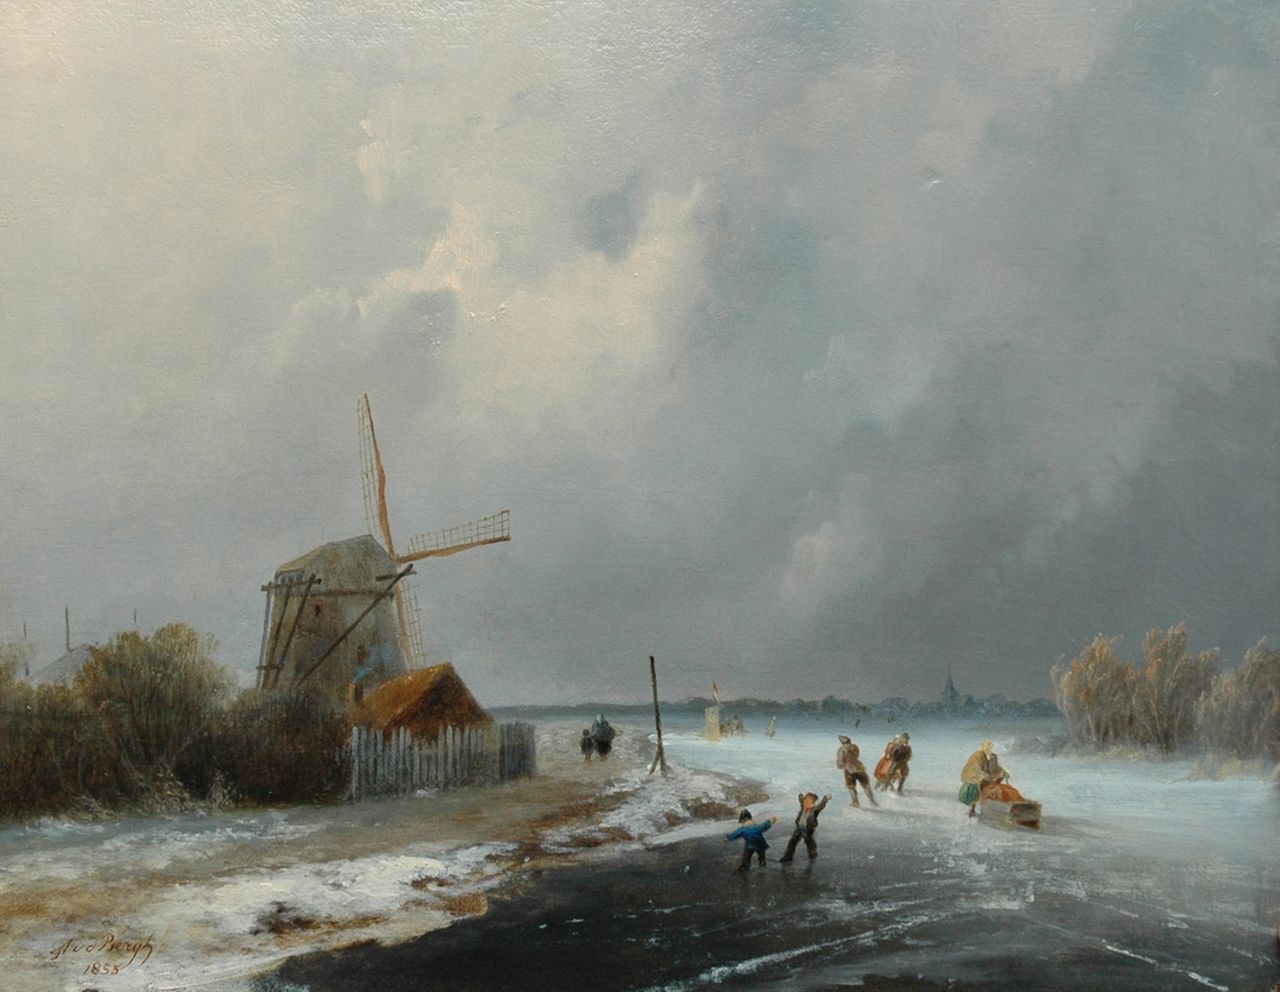 Andries van den Bergh | A winter scene with skaters near a windmill, Öl auf Holz, 30,4 x 38,6 cm, signed l.l. und dated 1855